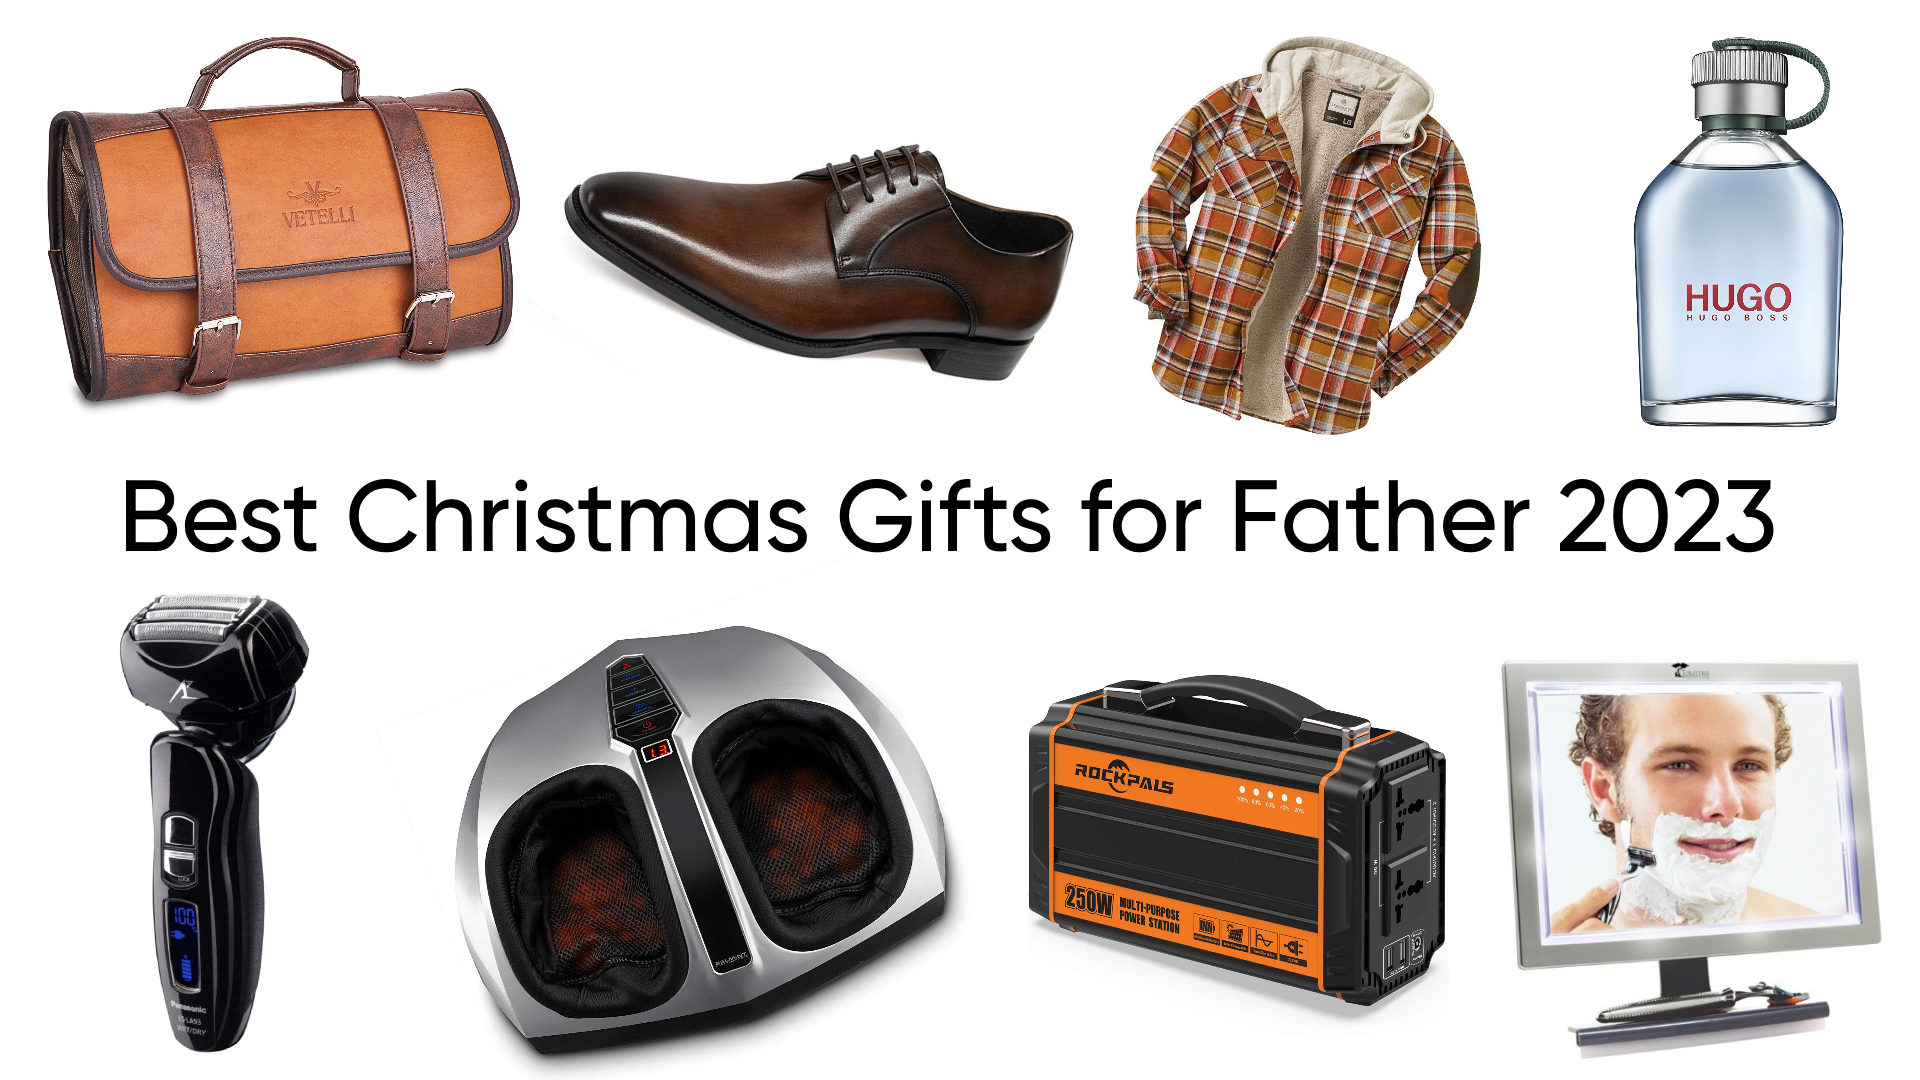 Best Christmas Gifts for Father in 2023